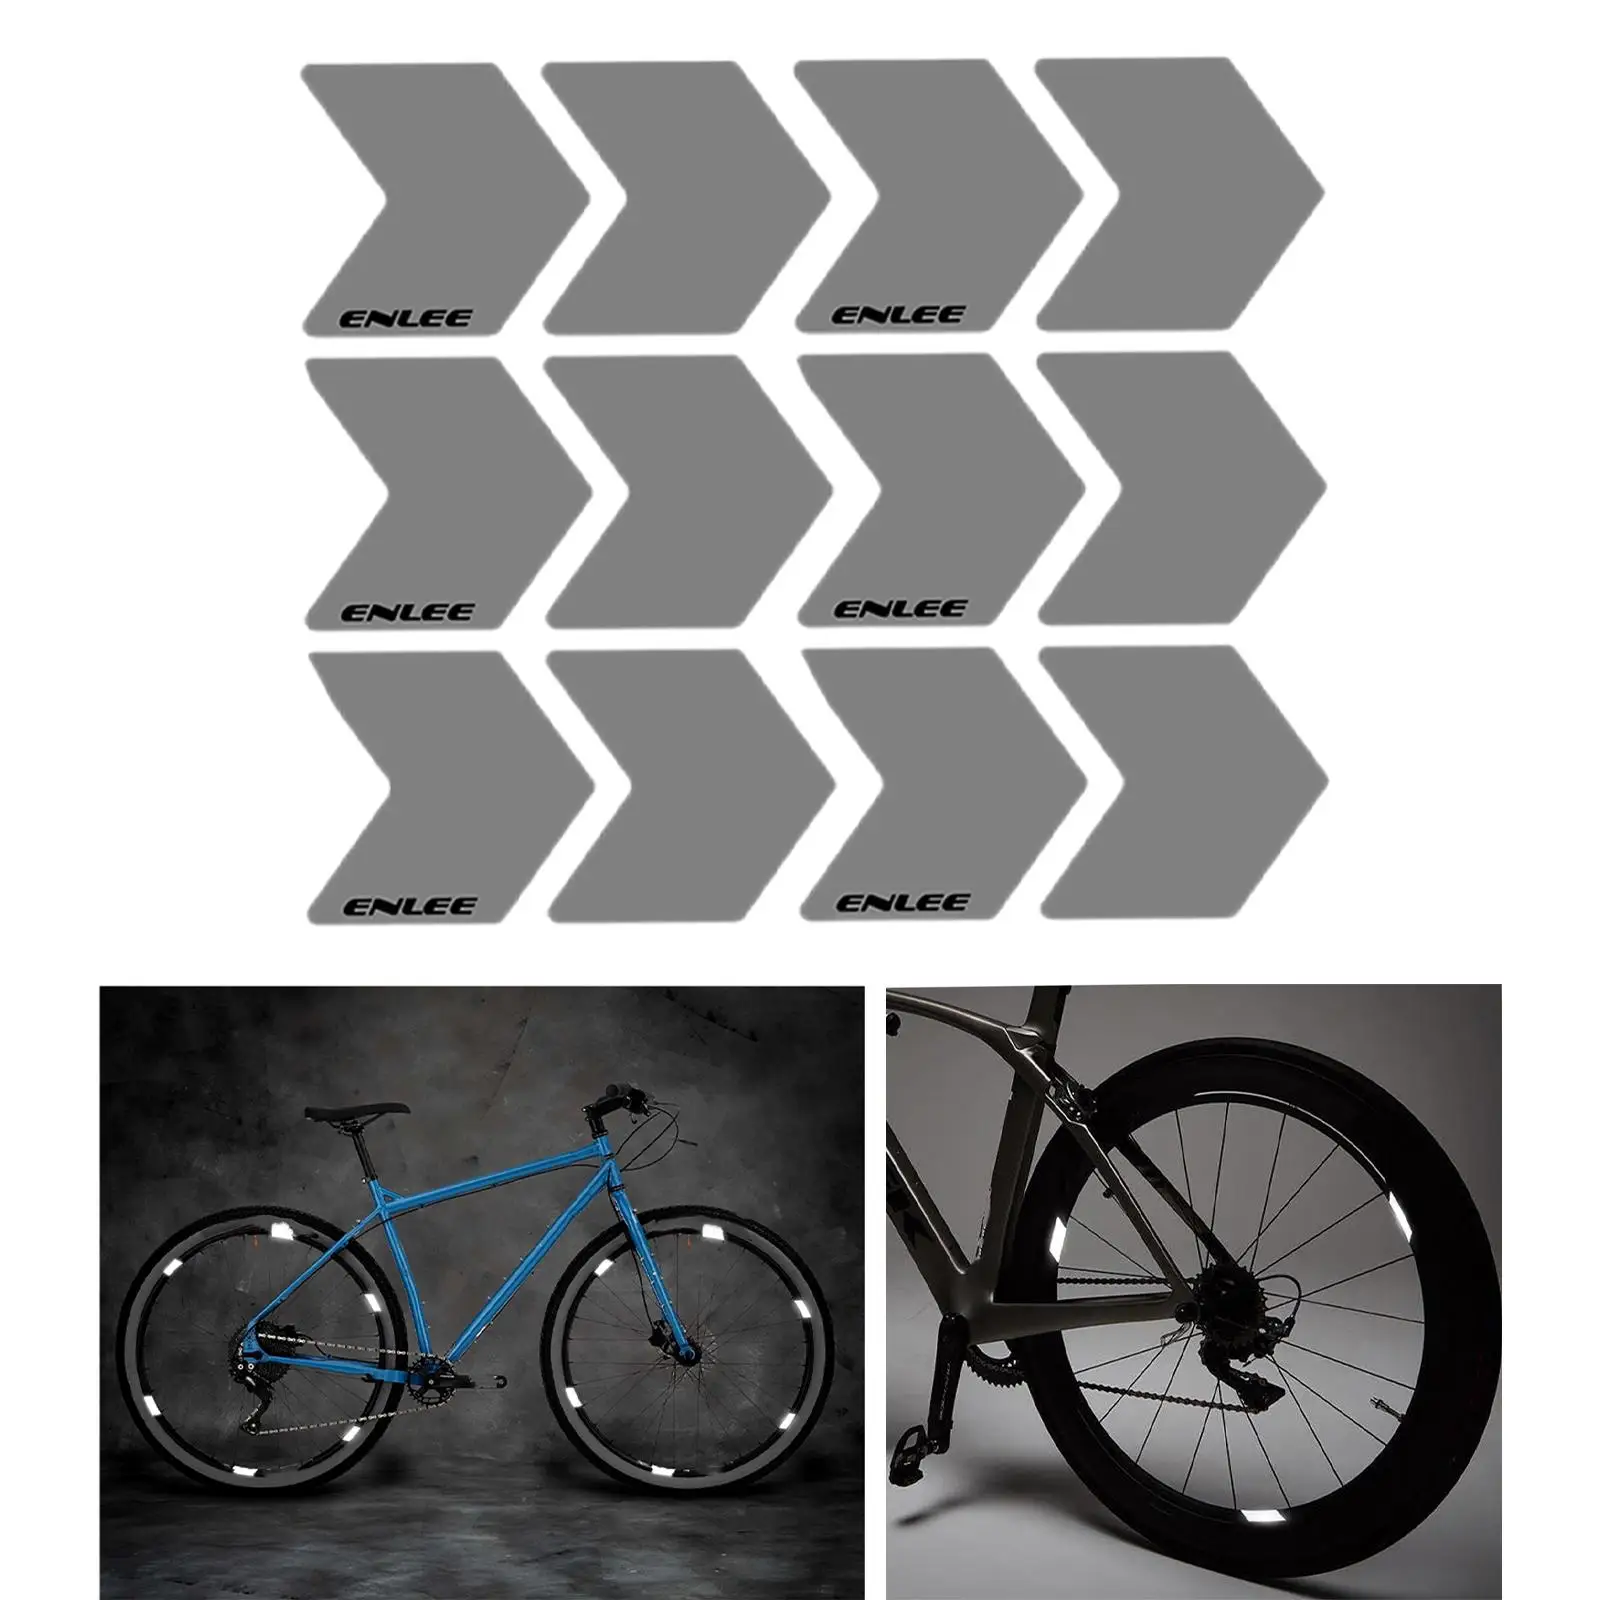 Wheel Rim Reflective Stickers Safety ° Visibility for